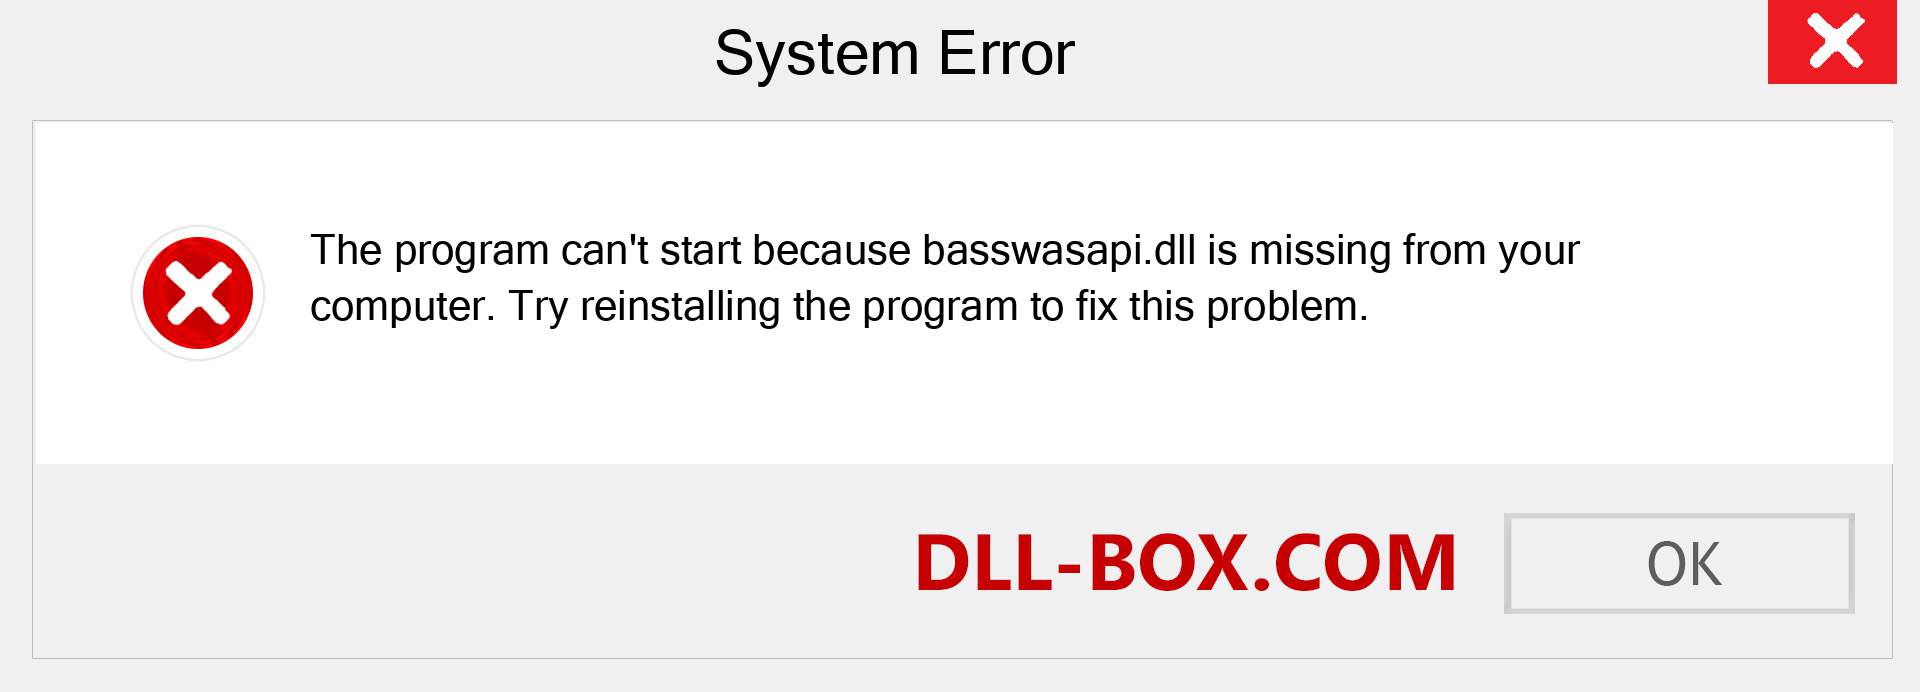  basswasapi.dll file is missing?. Download for Windows 7, 8, 10 - Fix  basswasapi dll Missing Error on Windows, photos, images